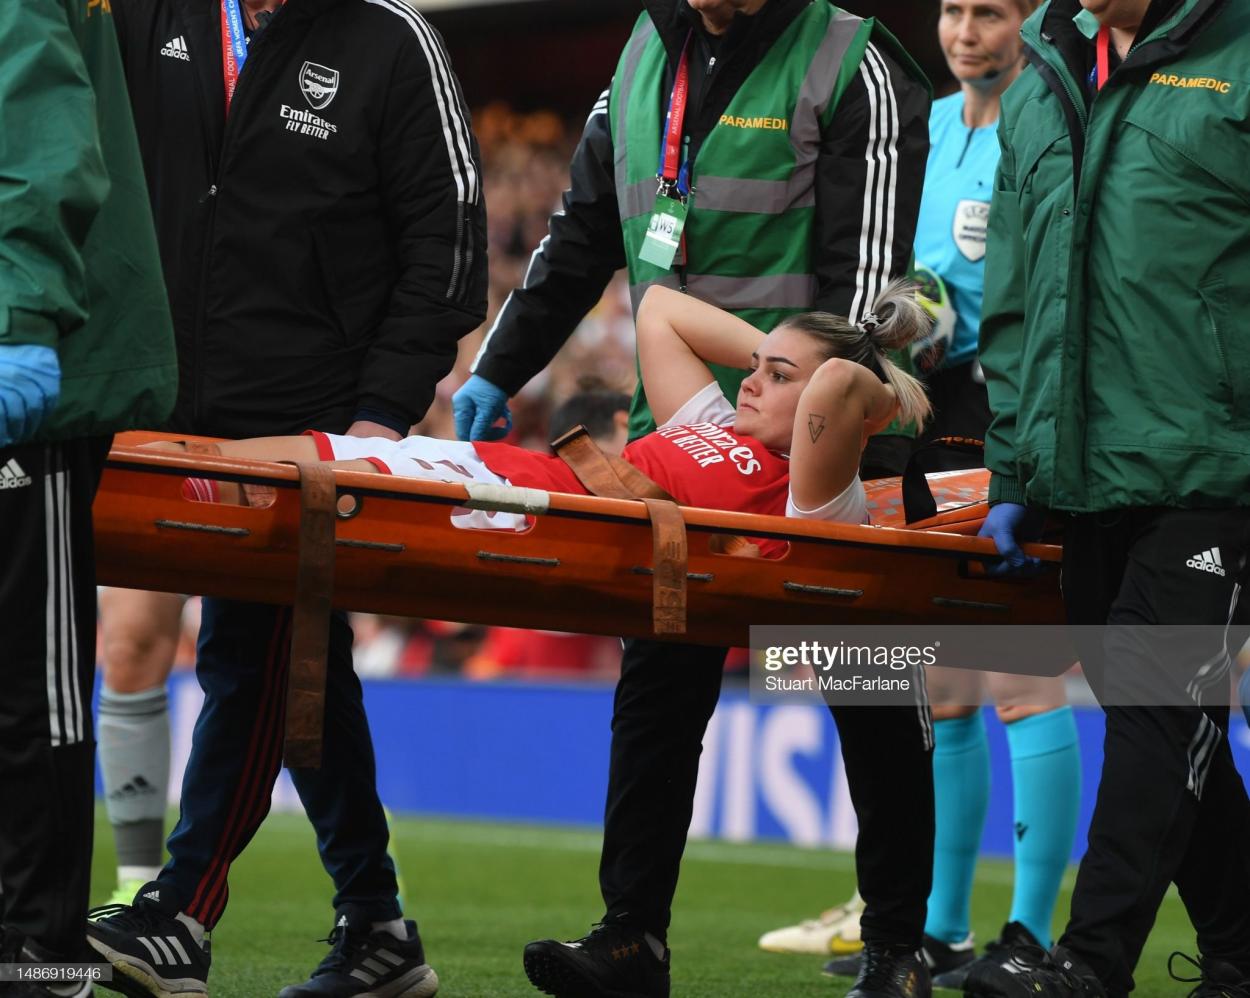 Injured Arsenal attacker <strong><a  data-cke-saved-href='https://www.vavel.com/en/football/2023/01/14/womens-football/1134653-wsl-round-up-red-devils-ramp-up-the-heat-beth-england-scores-on-debut-and-arsenal-takes-a-hit-inthe-title-race.html' href='https://www.vavel.com/en/football/2023/01/14/womens-football/1134653-wsl-round-up-red-devils-ramp-up-the-heat-beth-england-scores-on-debut-and-arsenal-takes-a-hit-inthe-title-race.html'>Laura Wienroither</a></strong> stretchered off during the UEFA Women's <strong><a  data-cke-saved-href='https://www.vavel.com/en/football/2023/04/27/womens-football/1145122-carla-ward-would-love-to-keep-loanee-kirsty-hanson-long-term.html' href='https://www.vavel.com/en/football/2023/04/27/womens-football/1145122-carla-ward-would-love-to-keep-loanee-kirsty-hanson-long-term.html'>Champions League</a></strong> semifinal 2nd leg match between Arsenal and VfL Wolfsburg at Emirates Stadium on May 01, 2023. (Photo by Stuart MacFarlane/Arsenal FC via Getty Images)